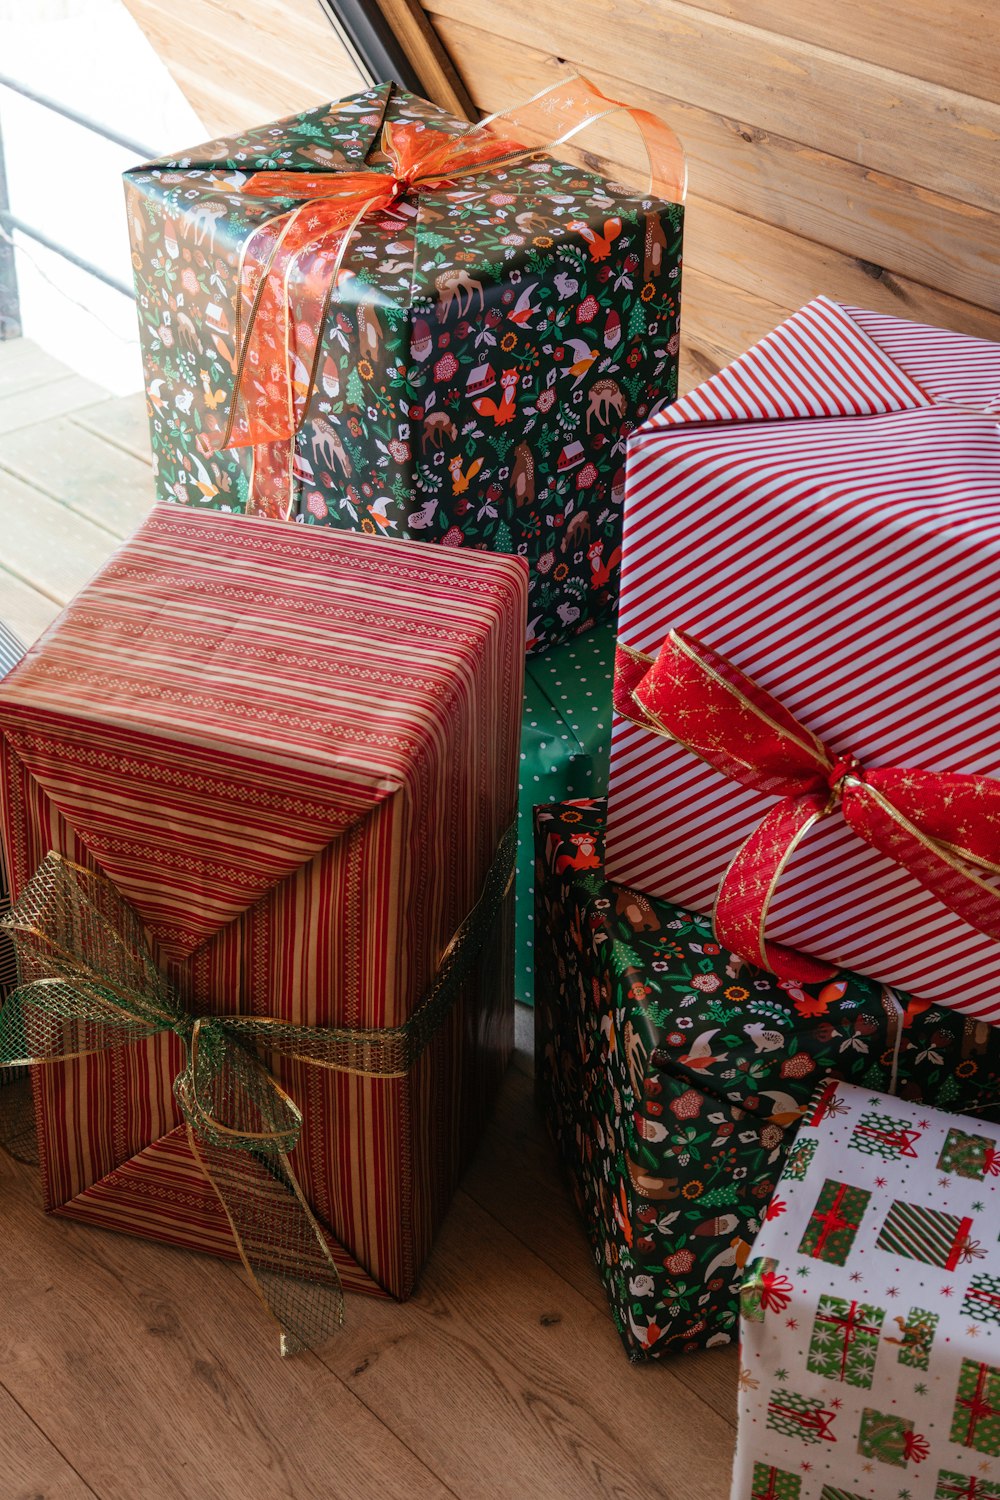 a group of wrapped presents sitting on top of a wooden floor